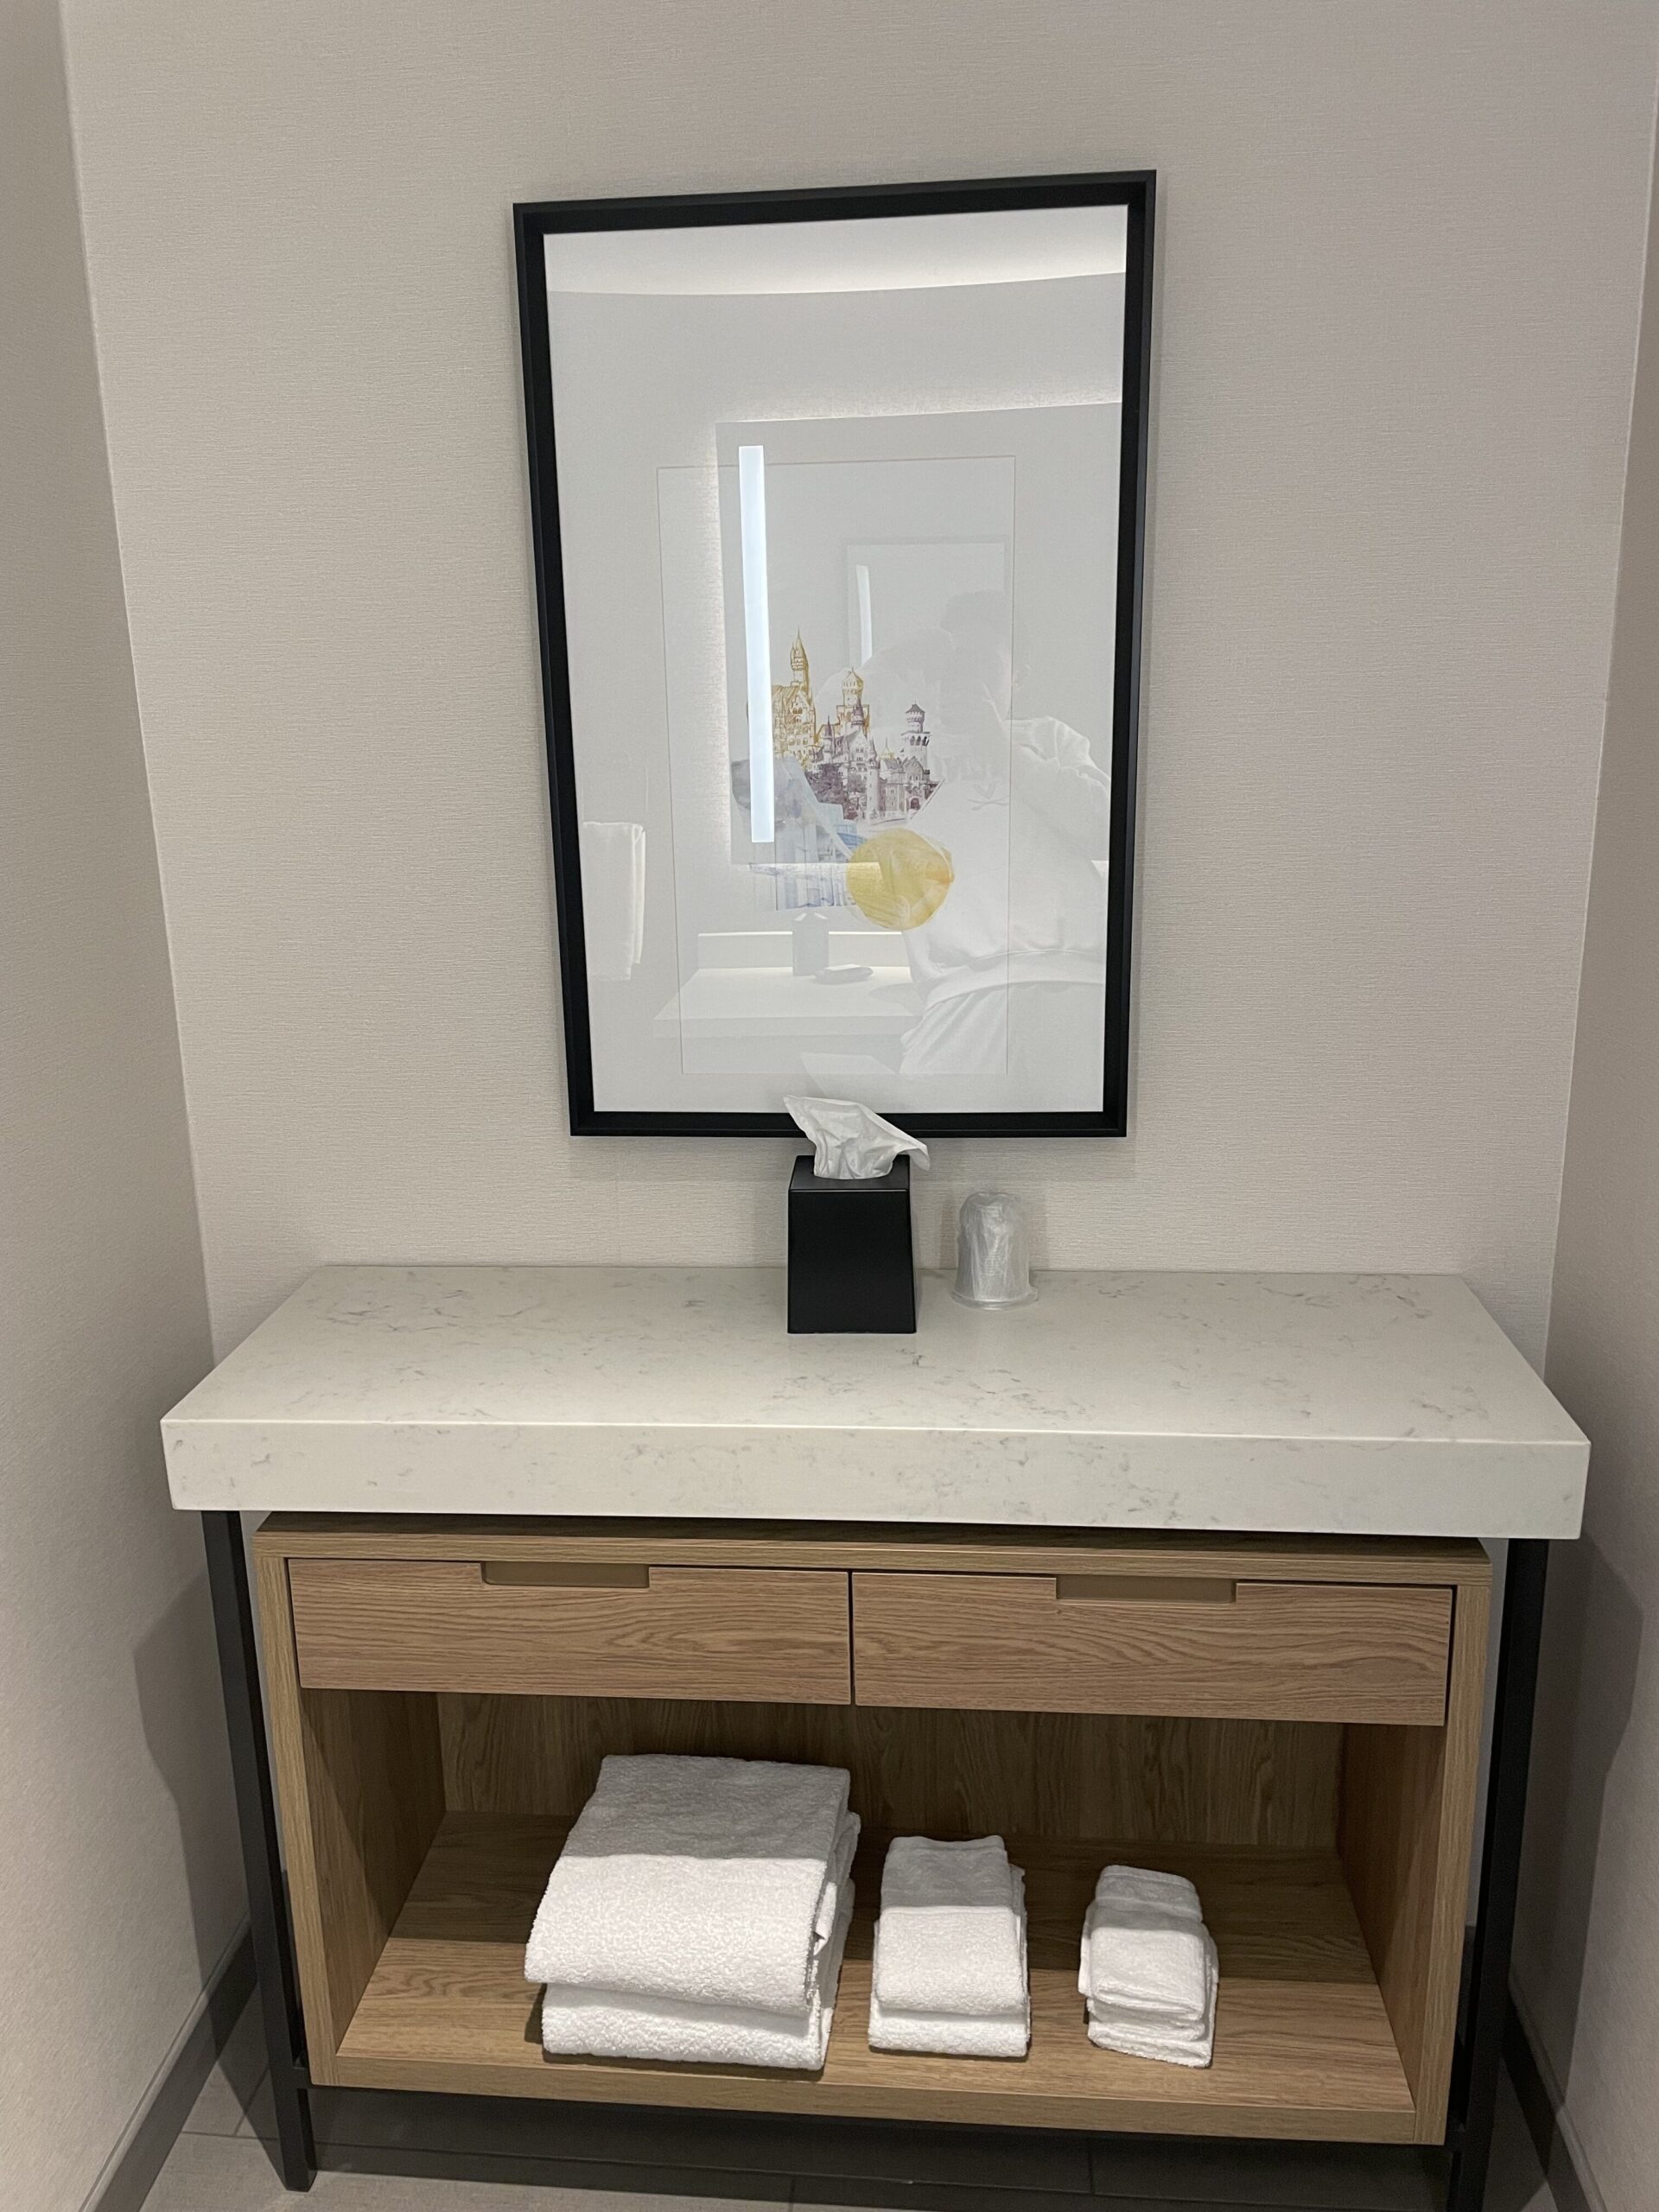 a bathroom vanity with a framed picture on the wall